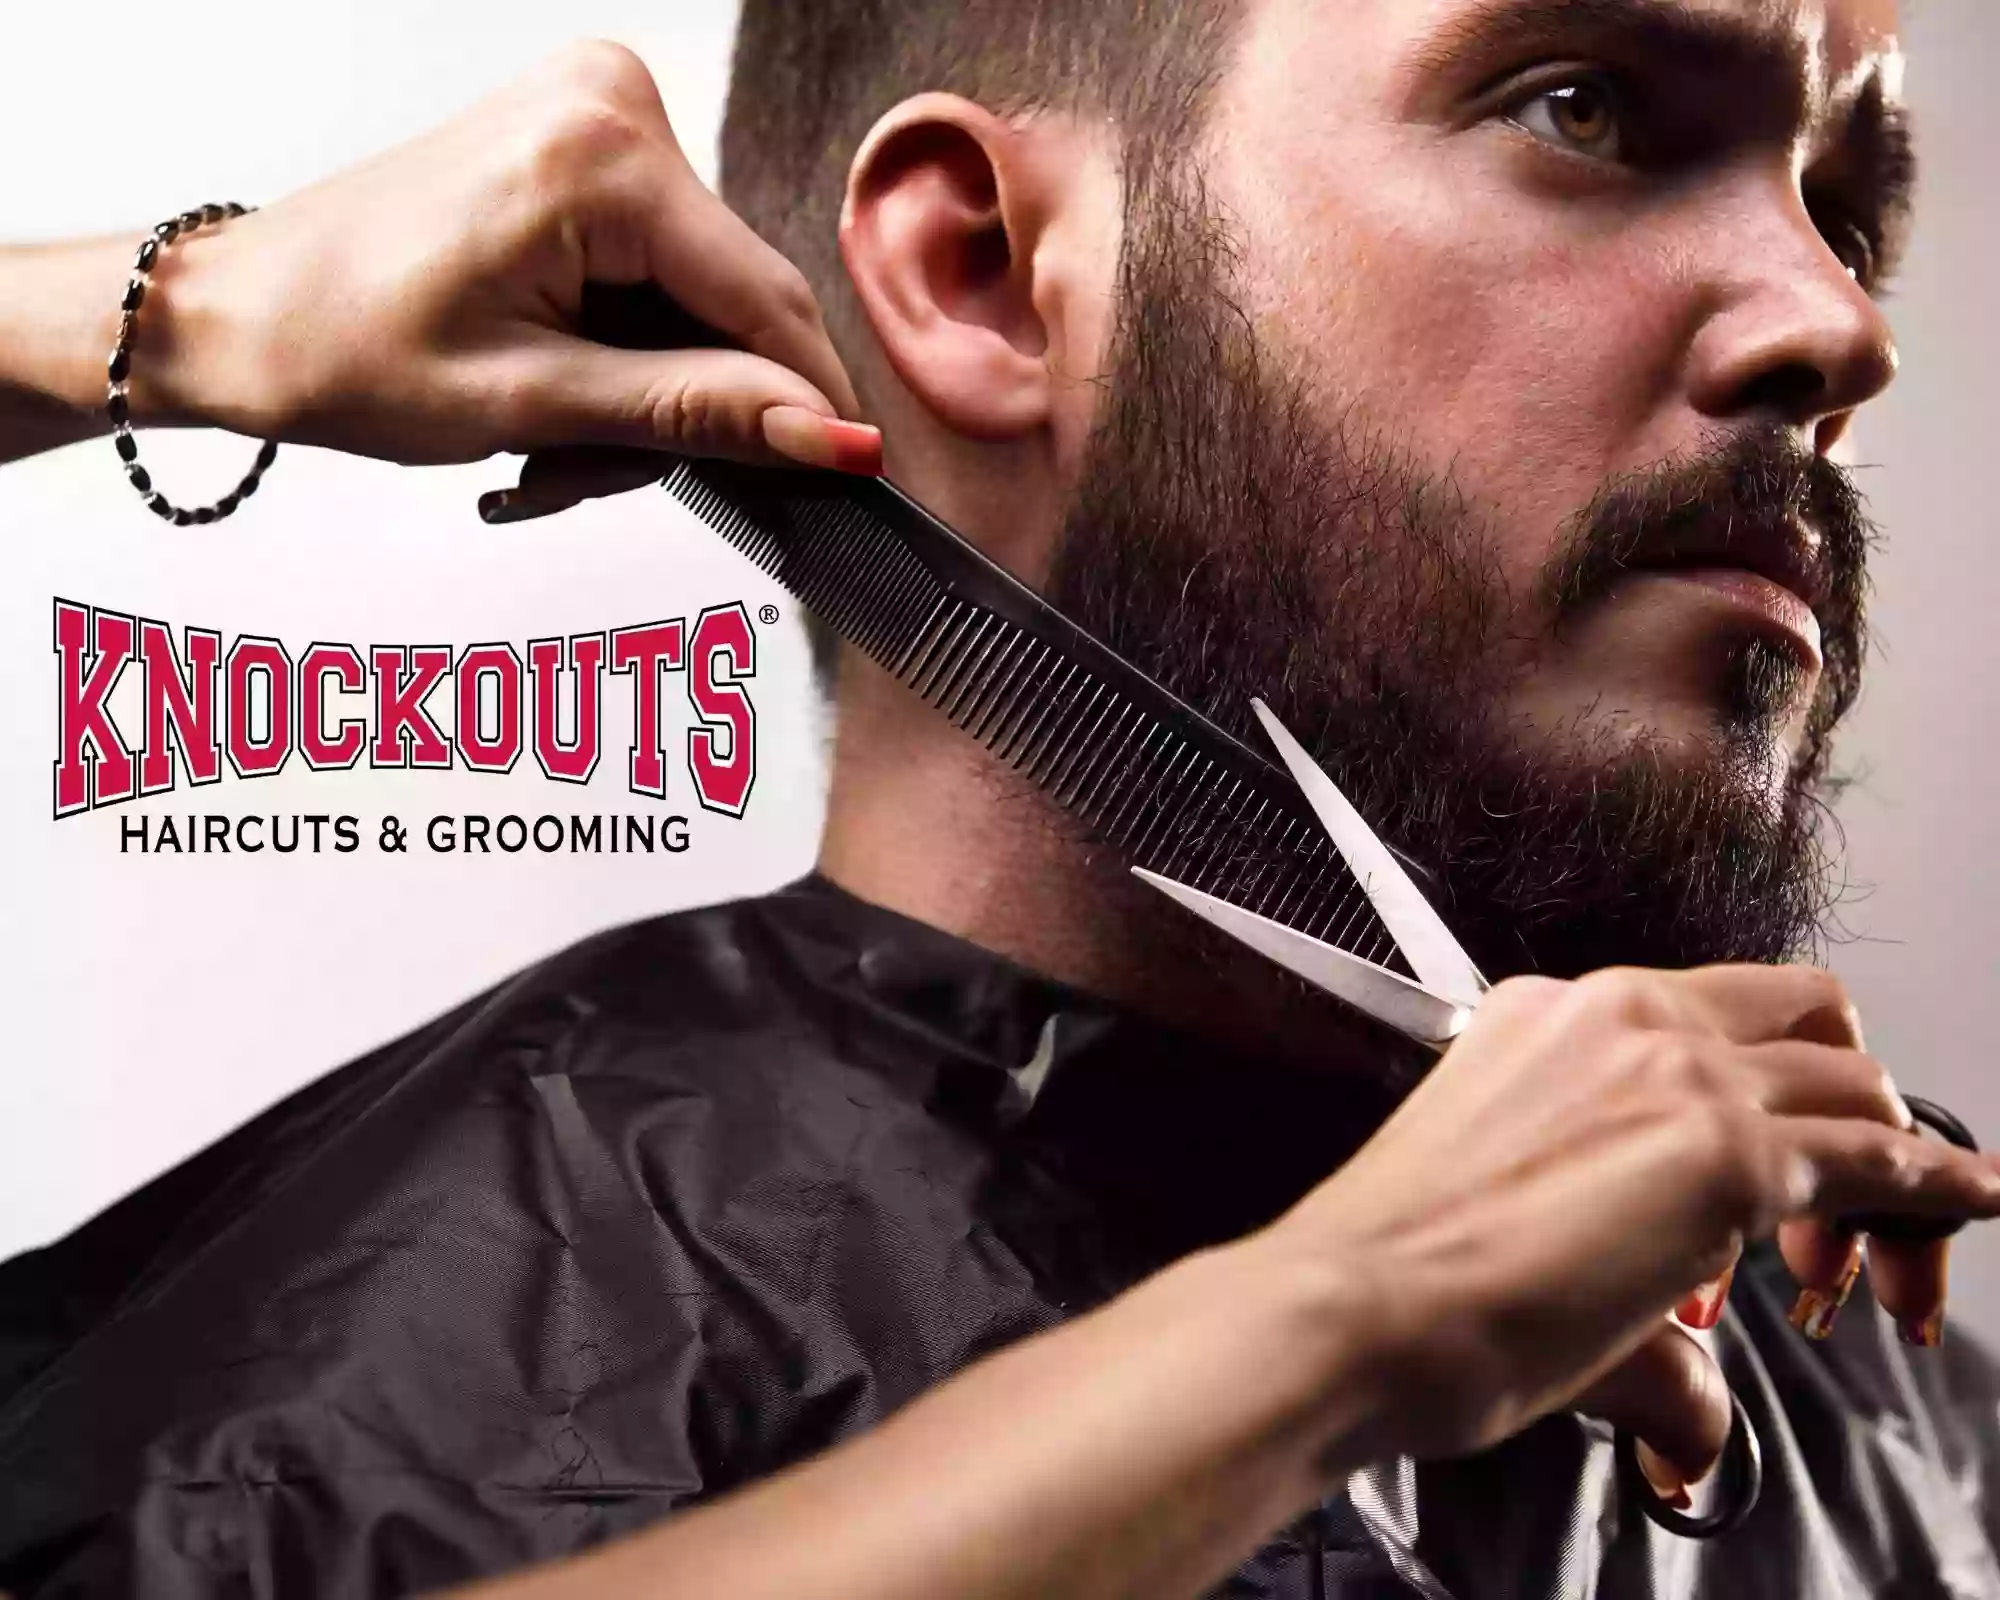 Knockouts Haircuts & Grooming Gattis Crossing